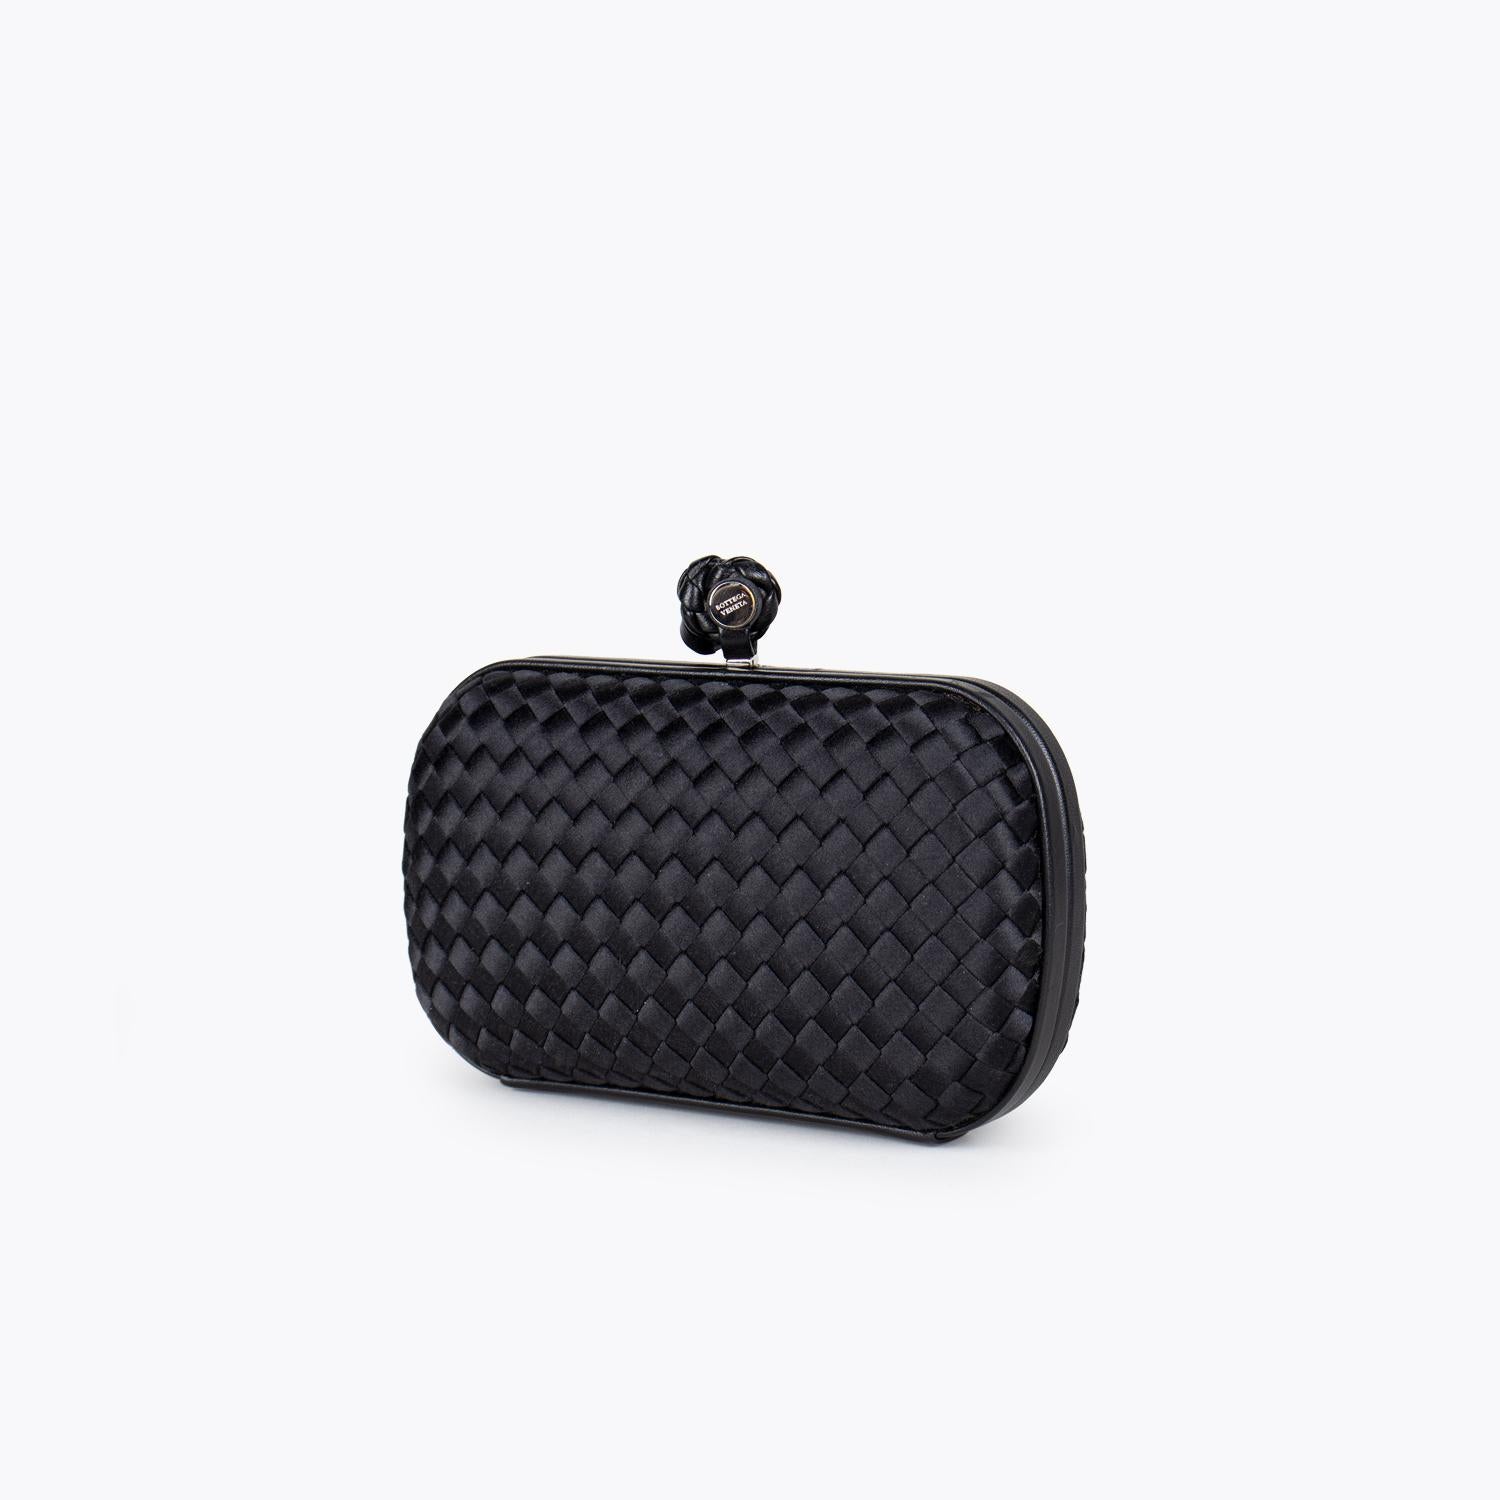 Black Intrecciato satin Bottega Veneta Knot clutch with

– Silver tone hardware
– Tonal satin lining and push-lock closure at top

Overall Preloved Condition: Very Good
Exterior Condition: Very Good. Minor surface scratches and marks